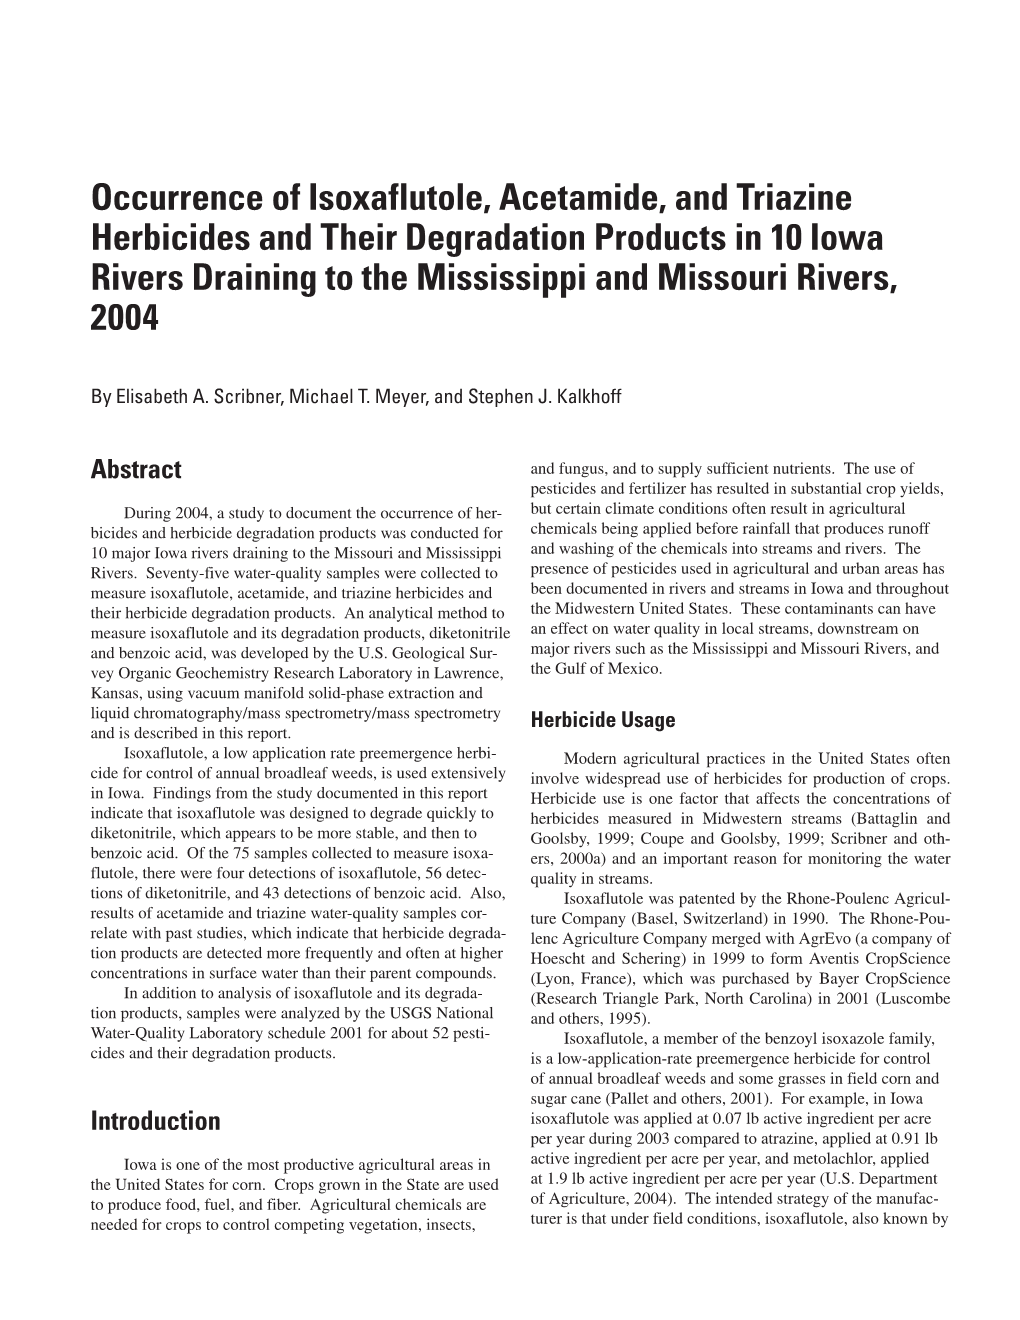 Occurrence of Isoxaflutole, Acetamide, and Triazine Herbicides and Their Degradation Products in 10 Iowa Rivers Draining to the Mississippi and Missouri Rivers, 2004